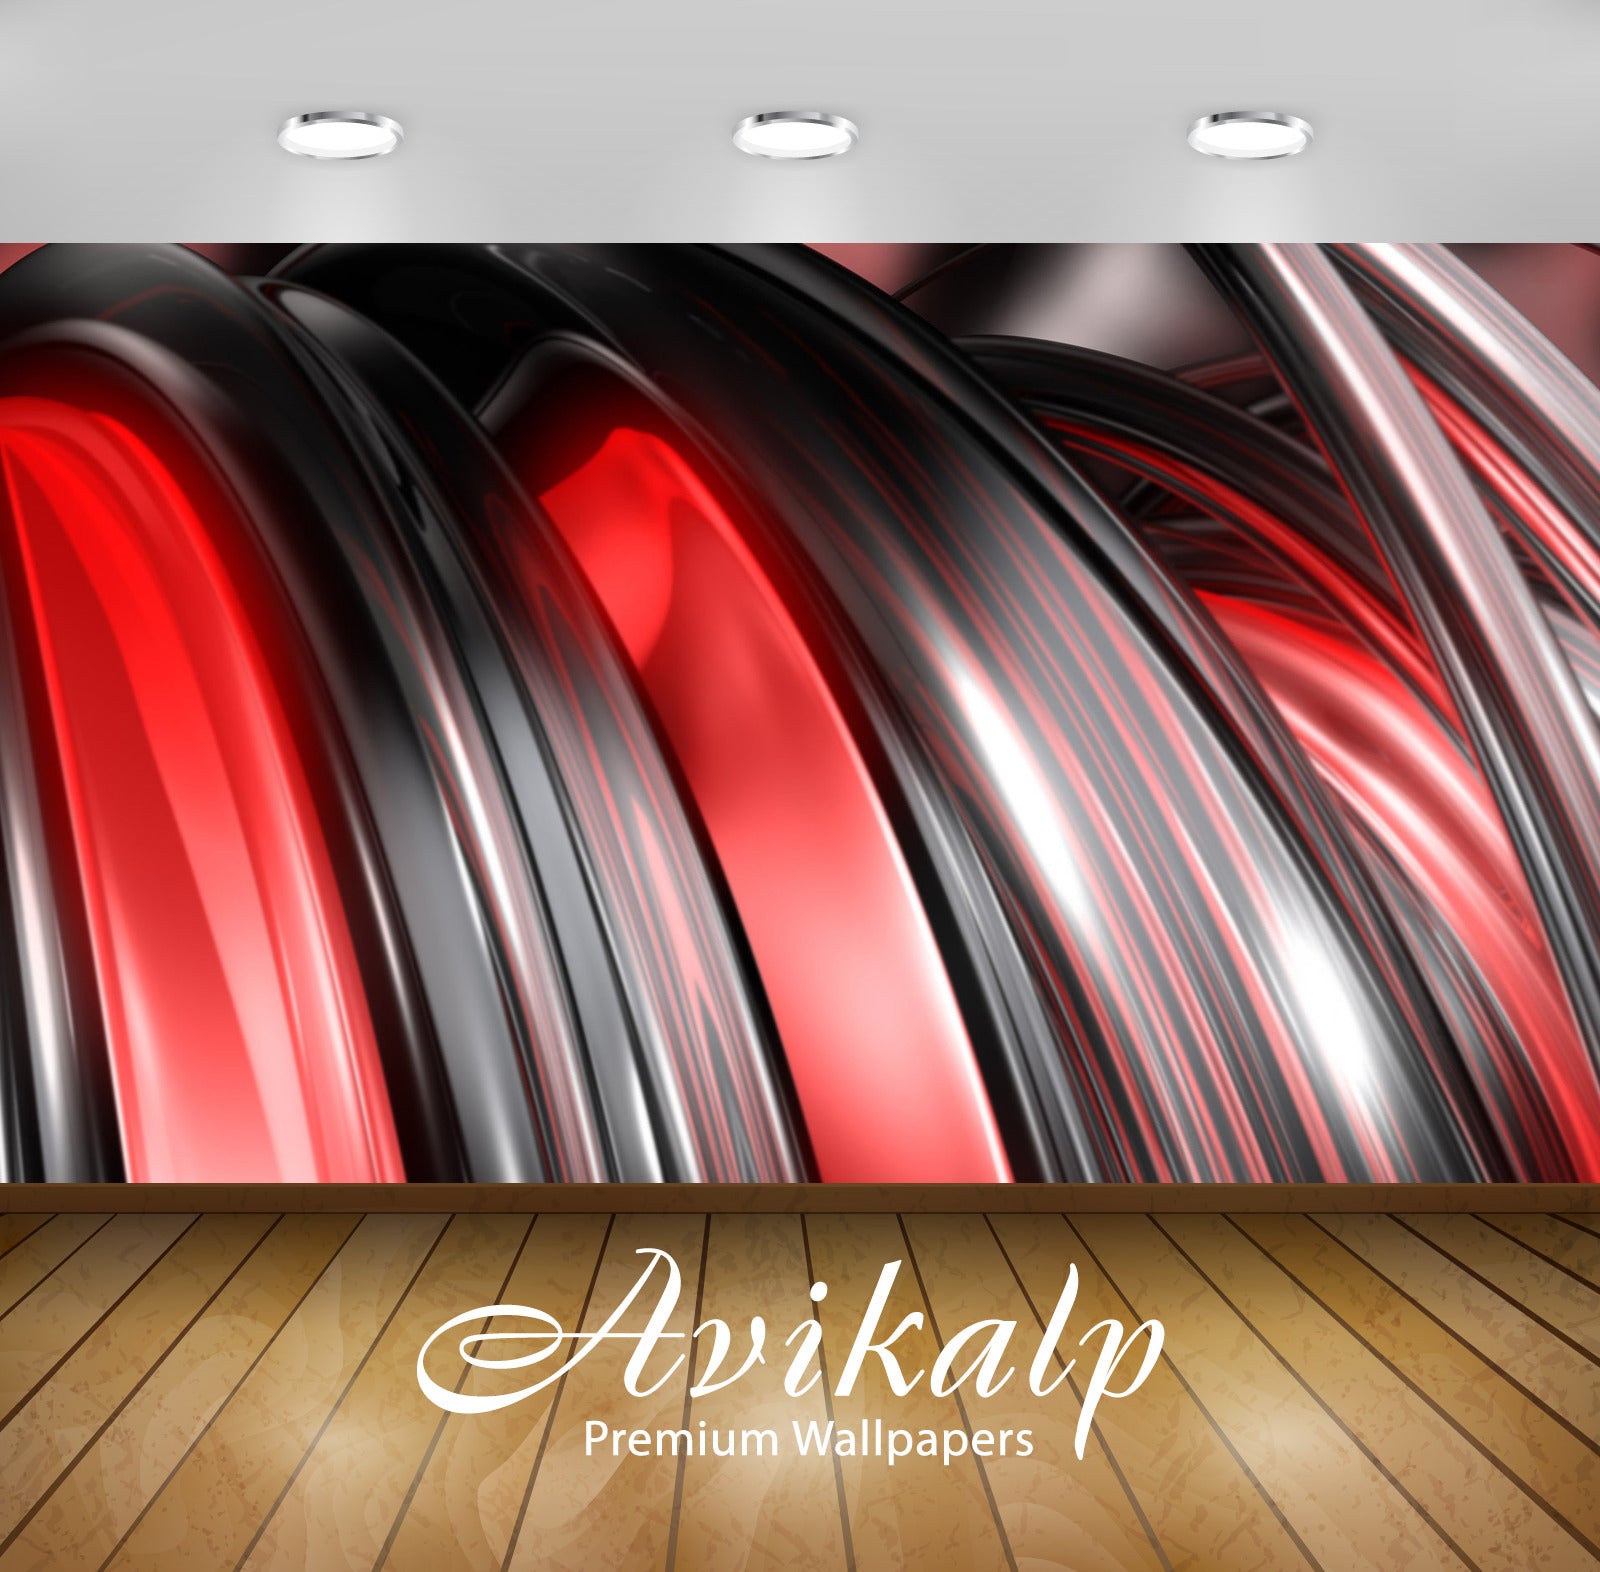 Avikalp Exclusive Awi4680 Wires Full HD Wallpapers for Living room, Hall, Kids Room, Kitchen, TV Bac